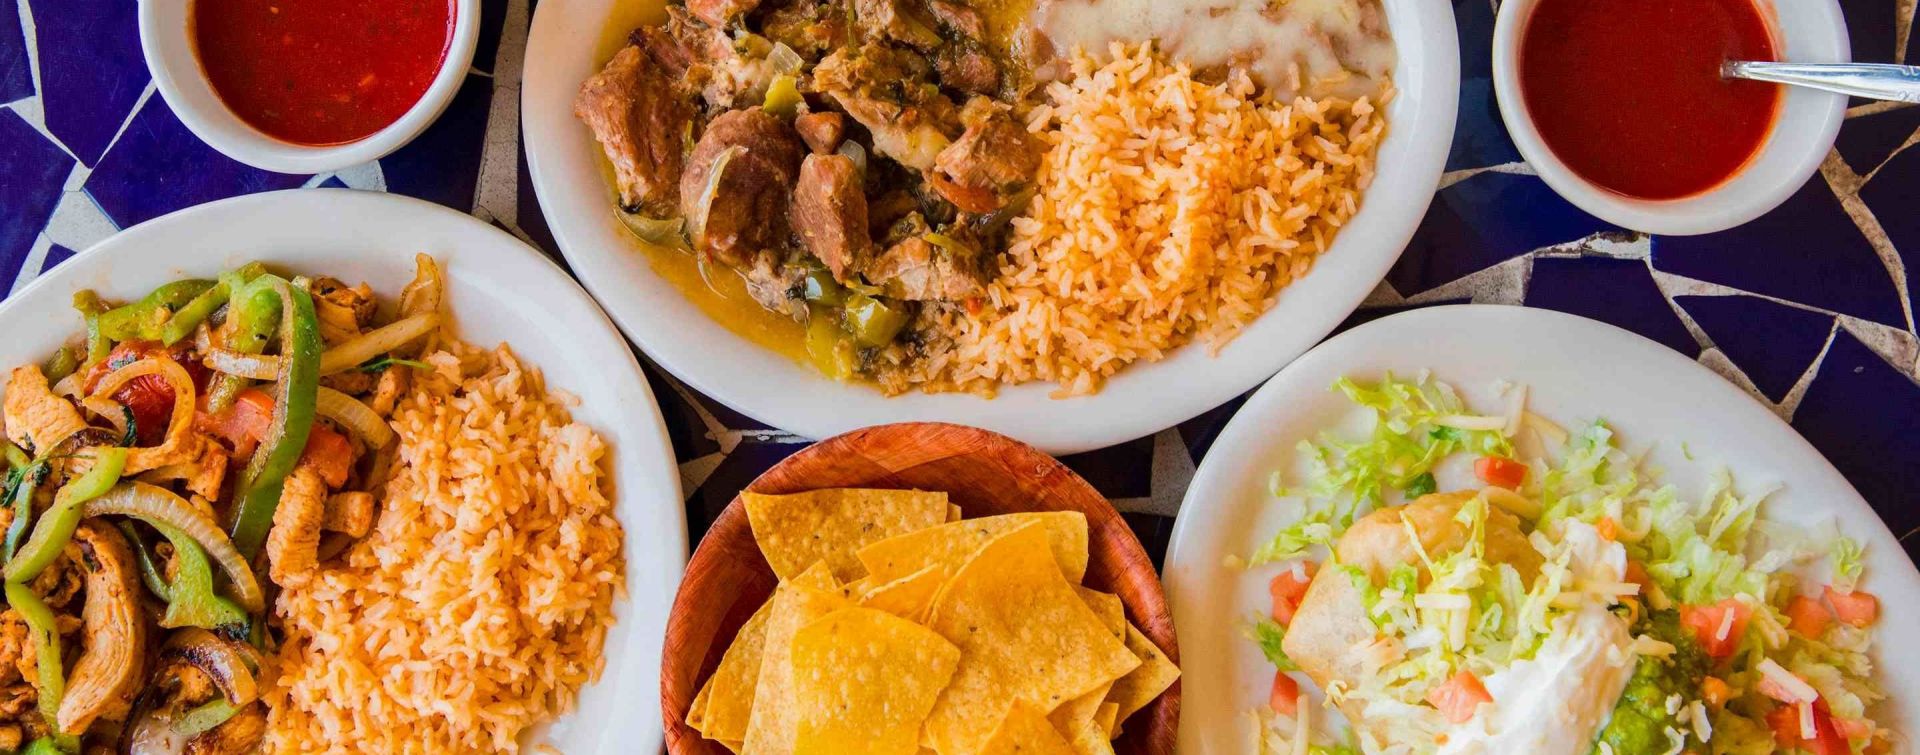 A trio of authentic Mexican food: Chile verde, Chicken picado, and chips and salsa at Chapala's Mexican Restaurant